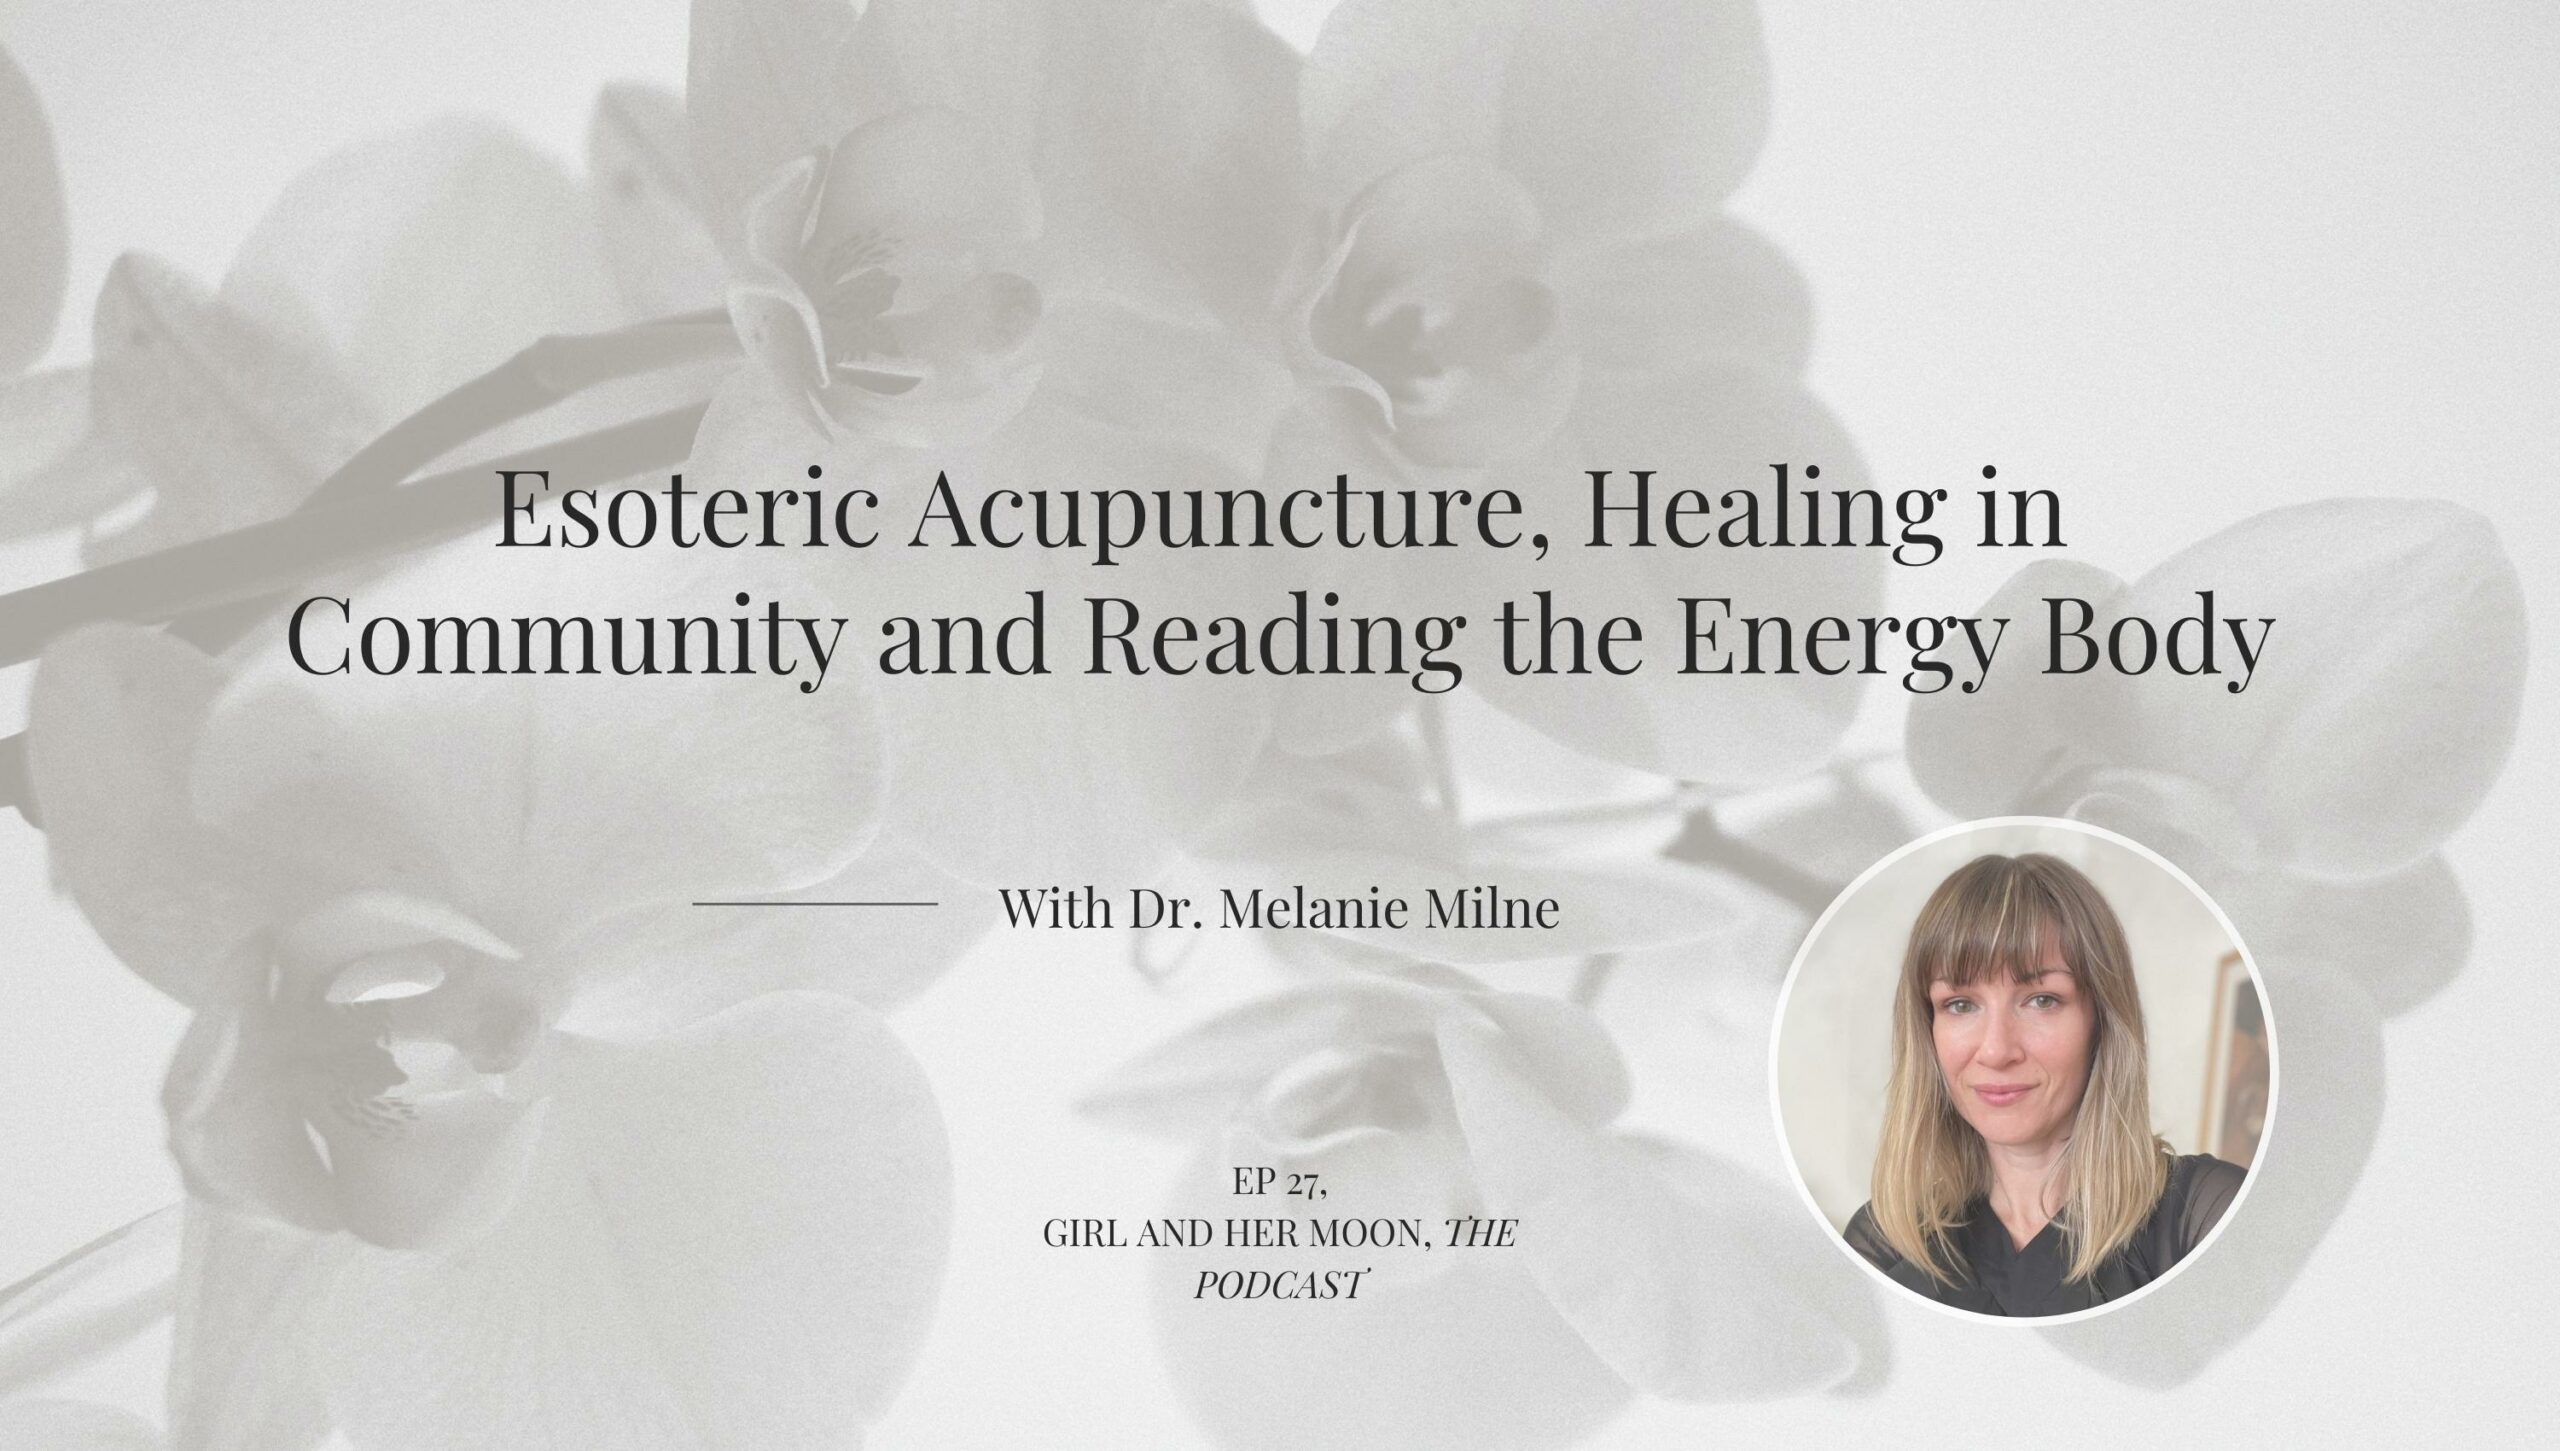 Esoteric Acupuncture, Healing in Community and Reading the Energy Body with Dr. Melanie Milne Girl and Her Moon the Podcast